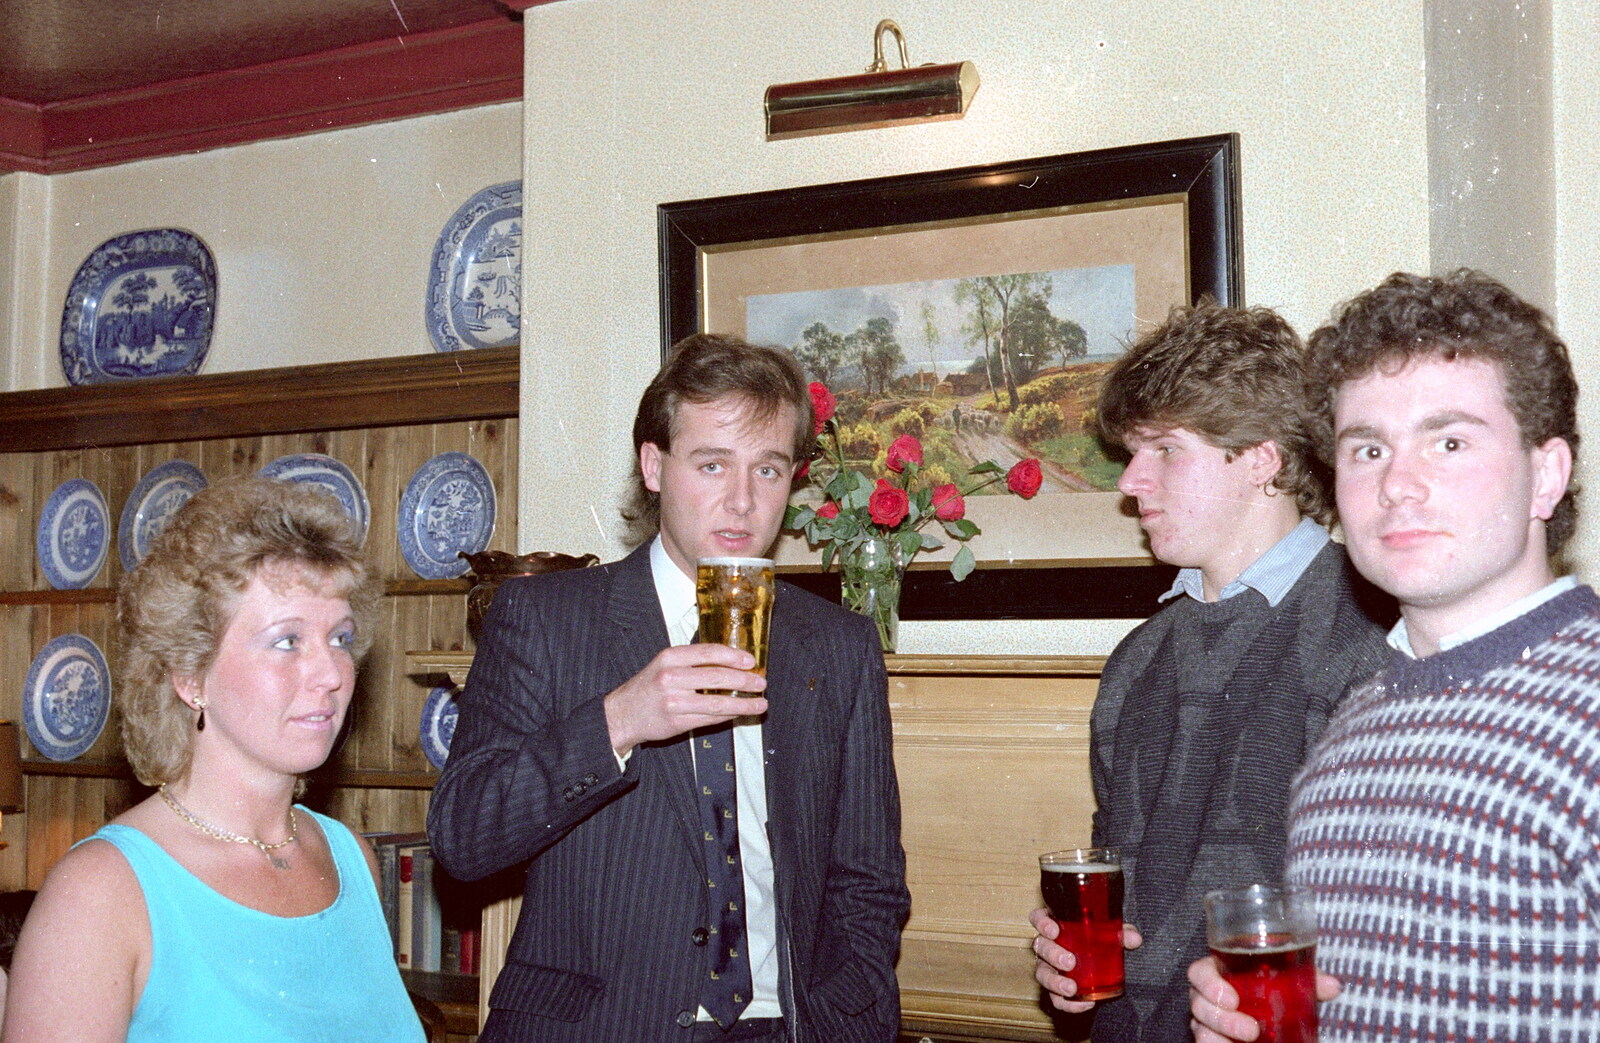 The Halls rep has a beer from Uni: RAG Week Abseil, Hitch Hike, and Beaumont Street Life Plymouth, Devon - 13th February 1986